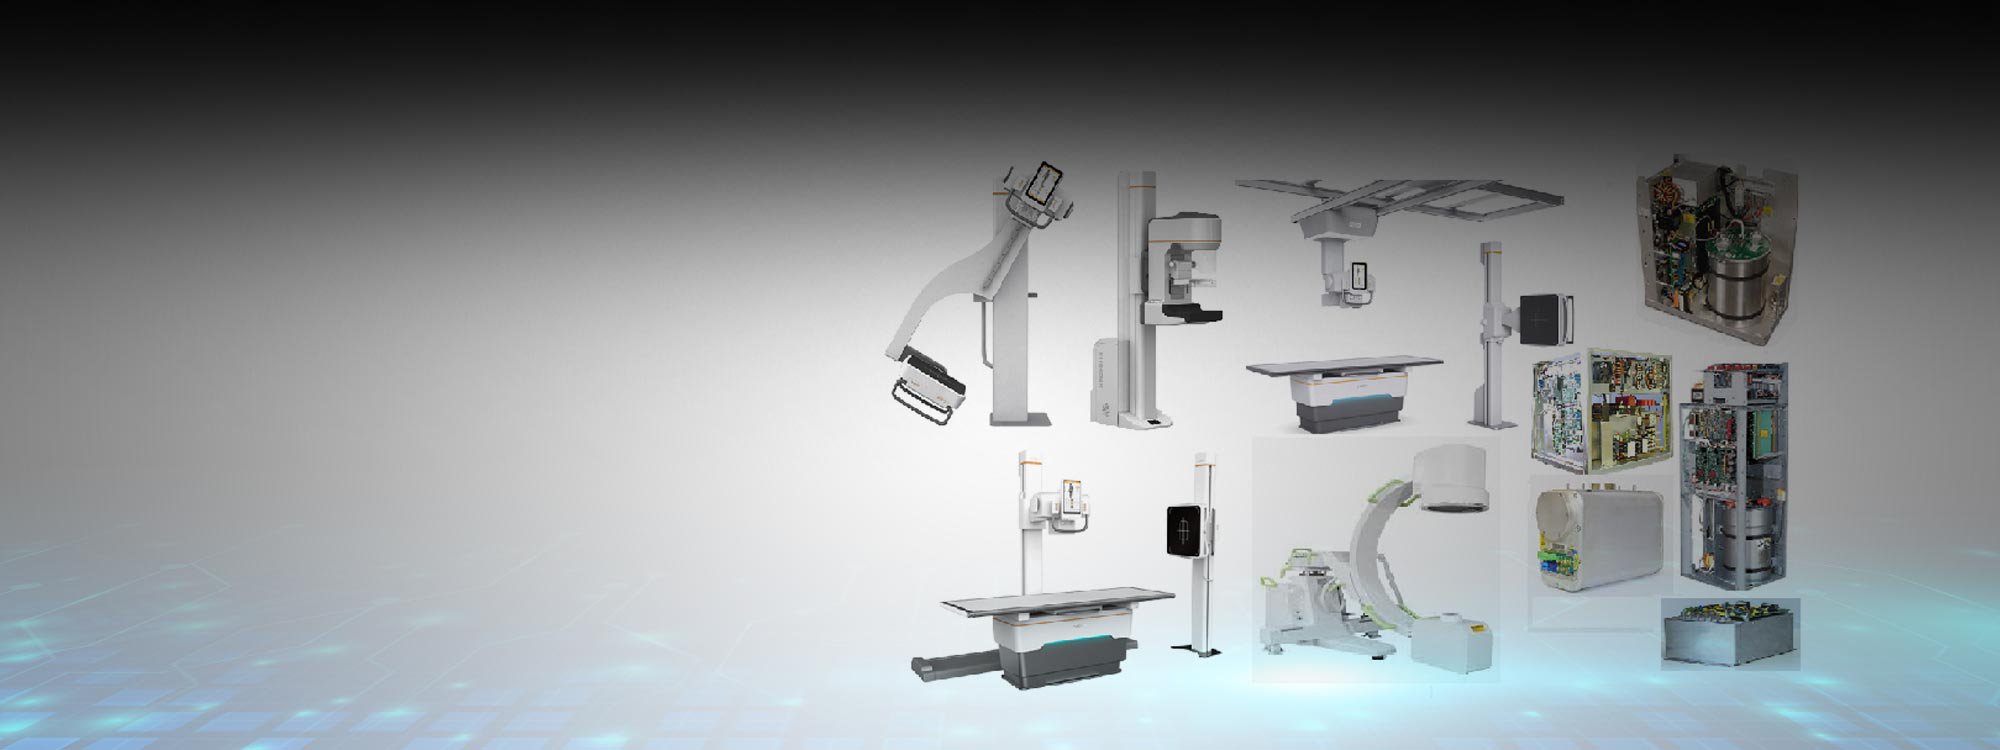 Radiology Devices Technical Service
